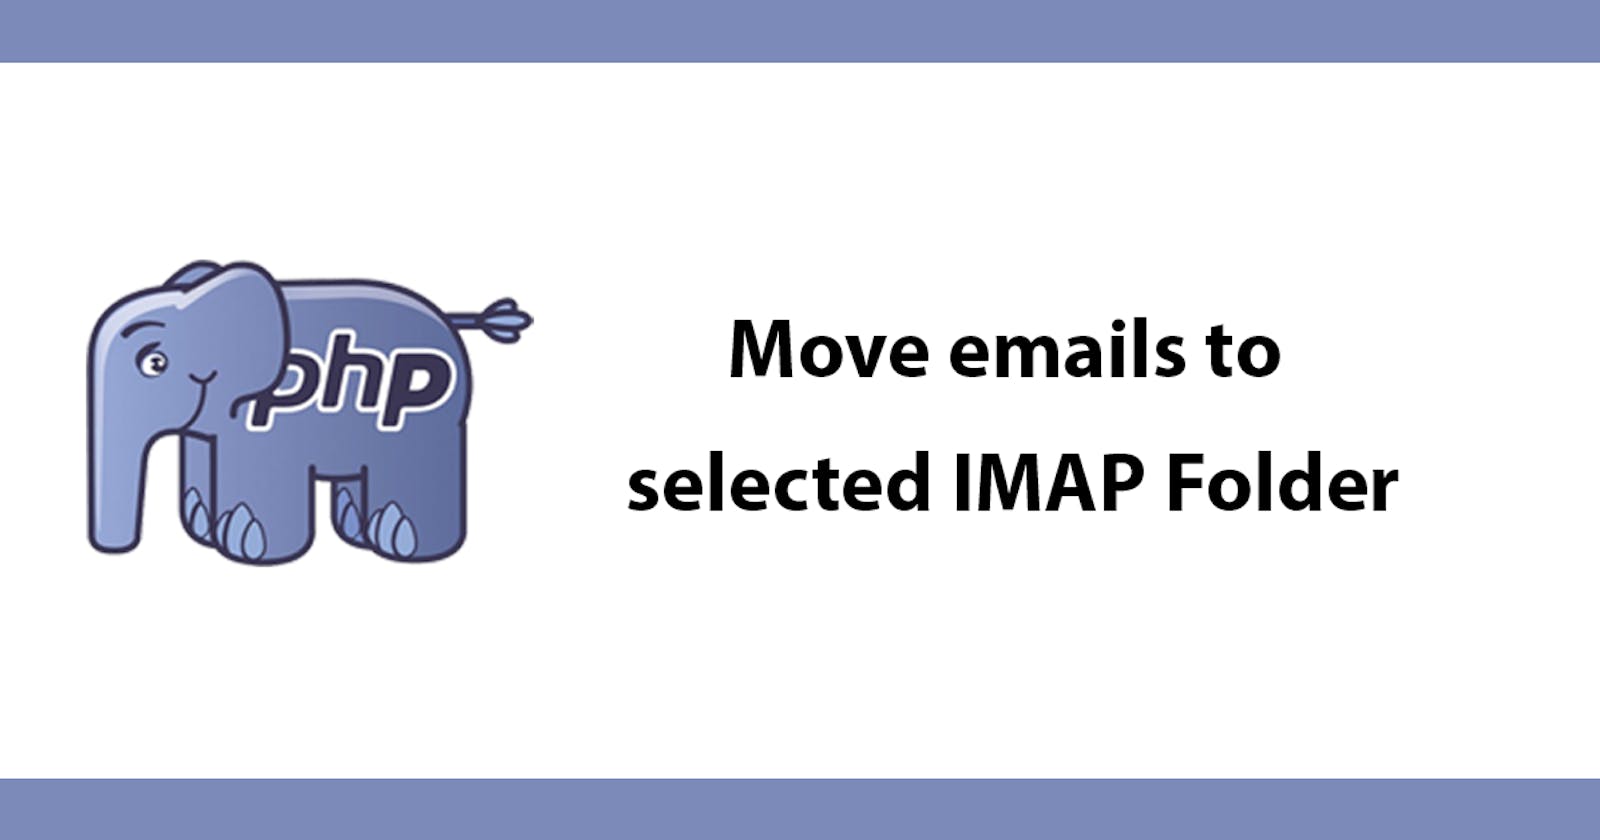 Move emails to selected IMAP Folder